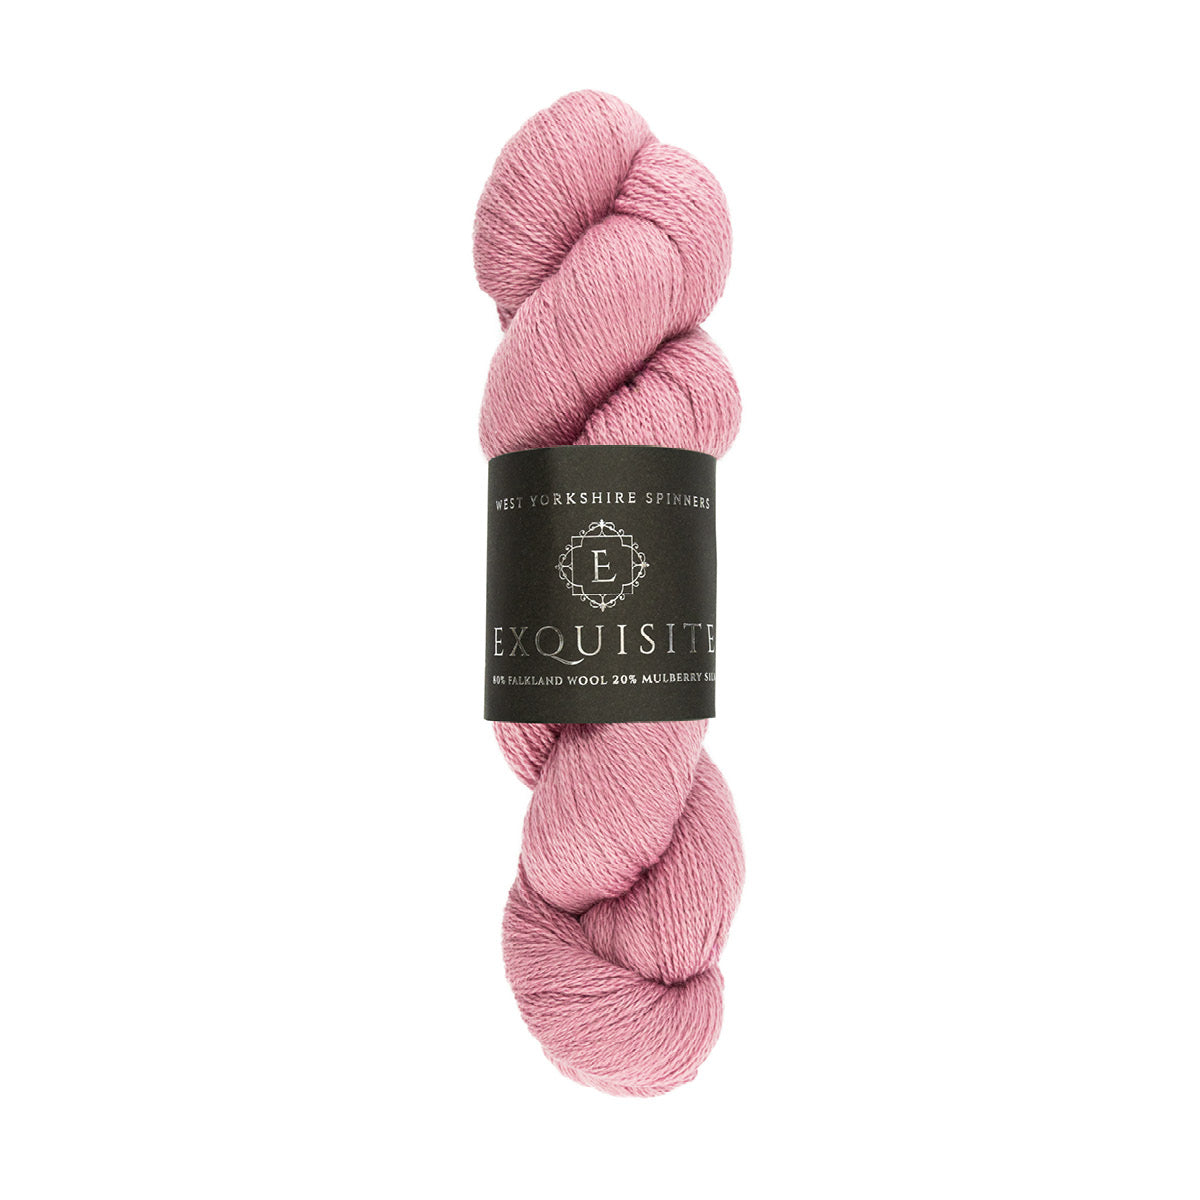 WYS West Yorkshire Spinners Exquisite Lace hank or skein in light pink shade rose 560